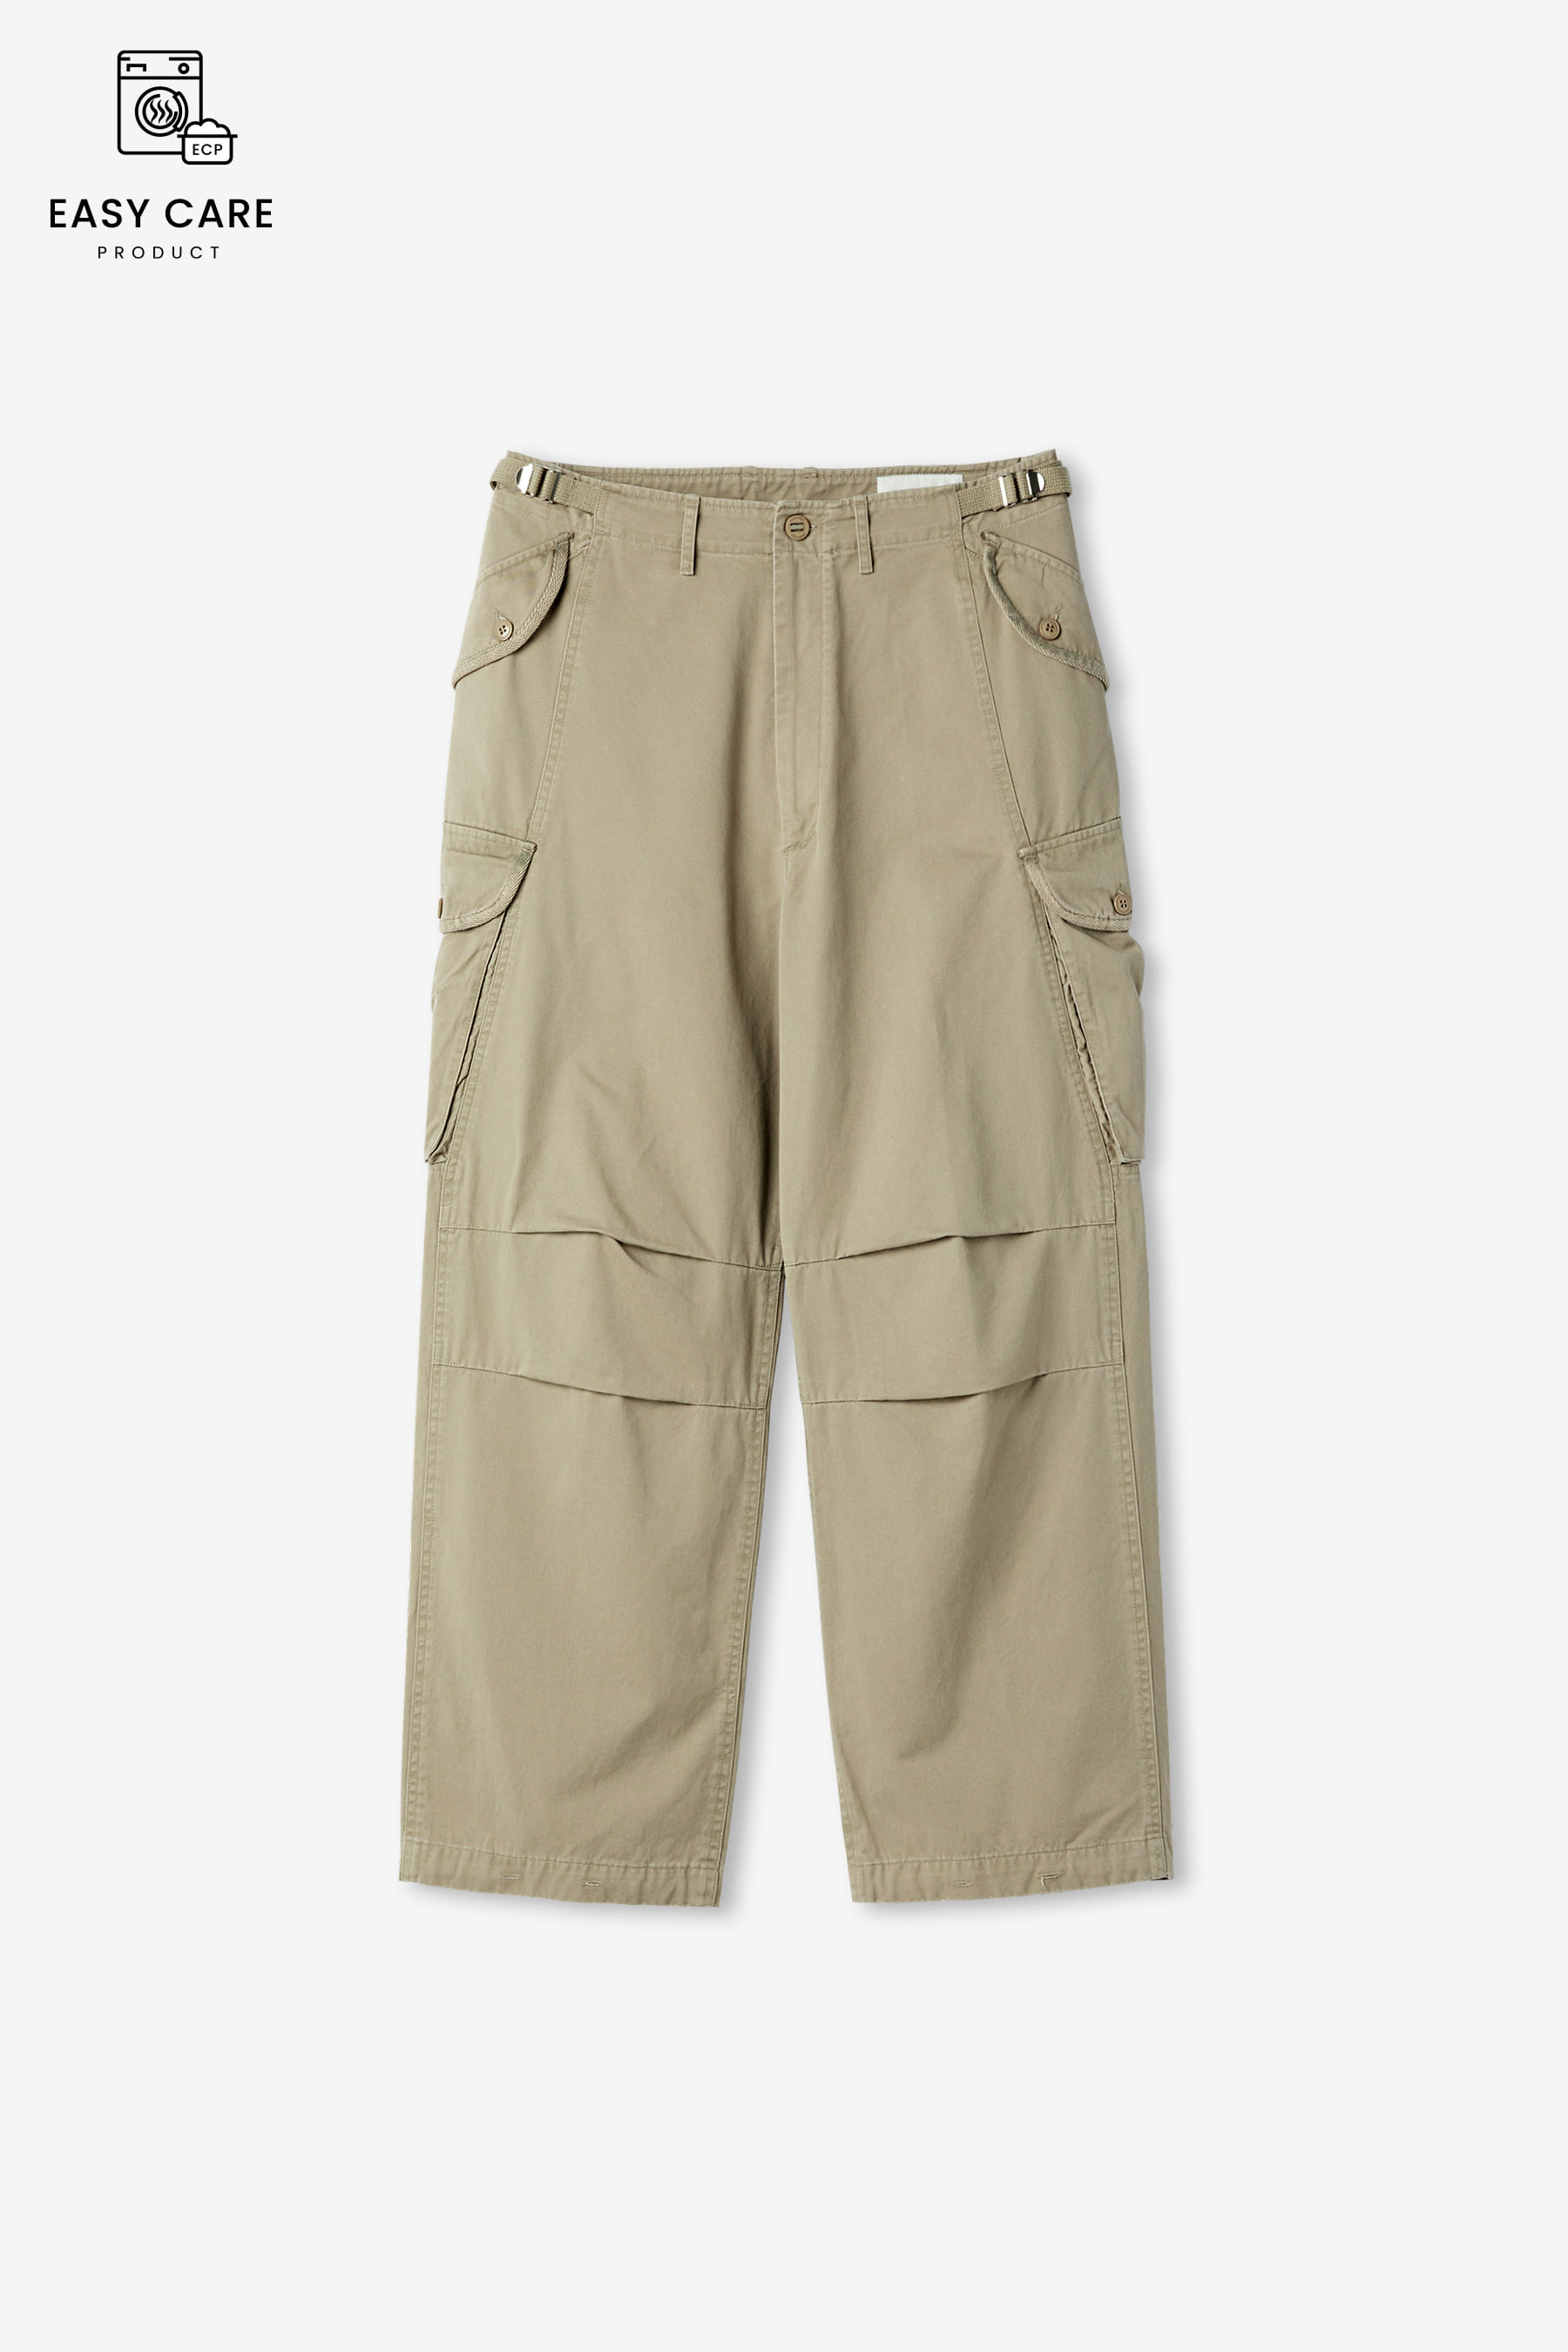 OYSTER M-74 WASHED CARGO PANTS (ECP GARMENT PROCESS)